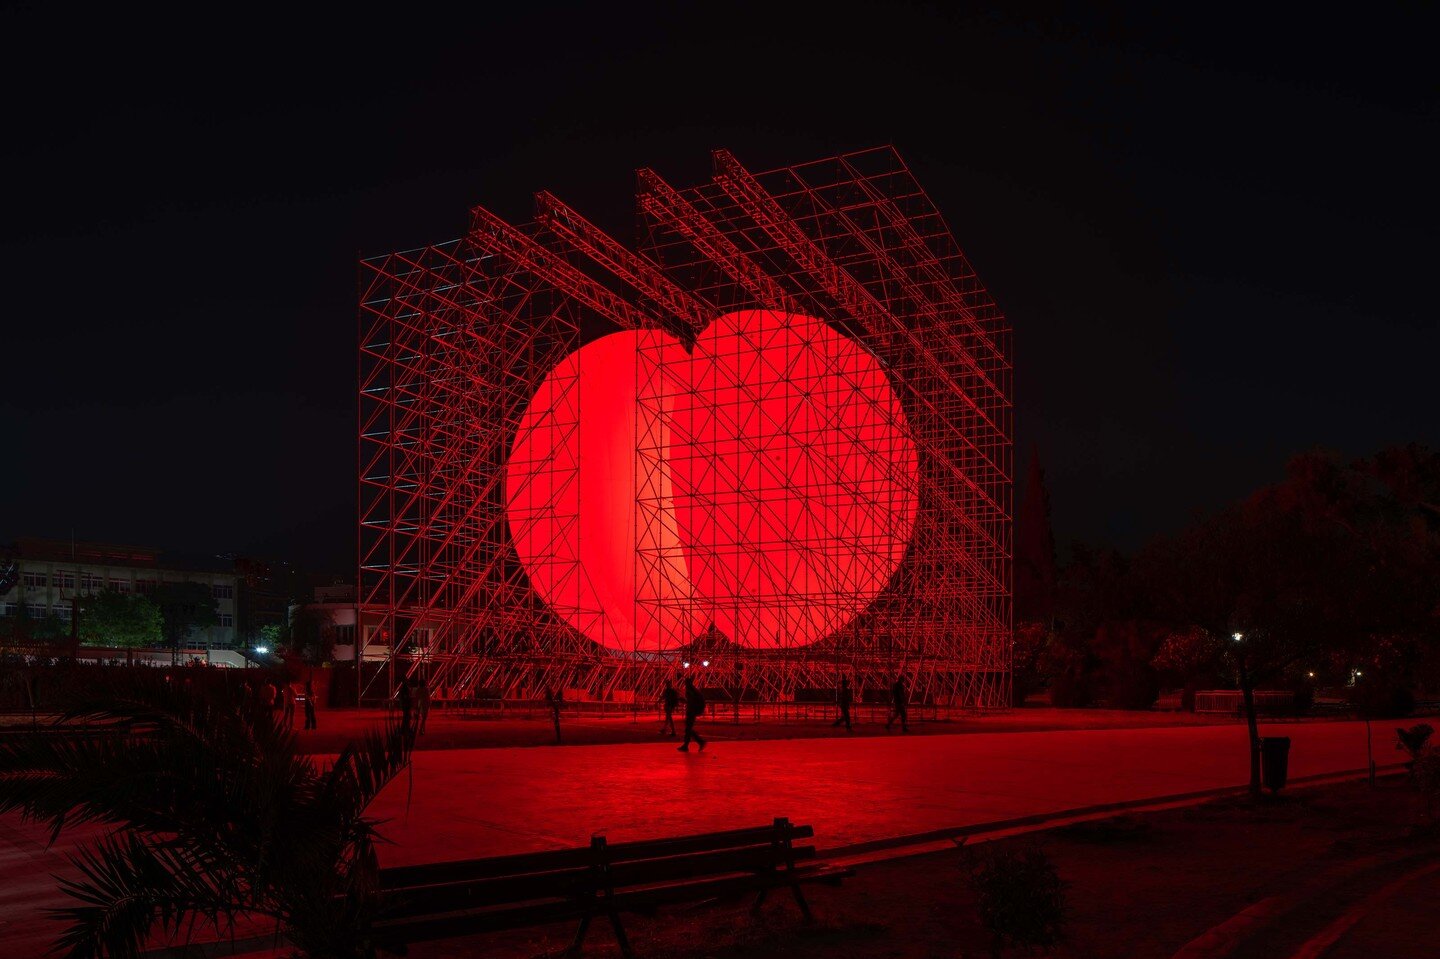 DIVIDED
Athens - Greece, 2022

A huge, luminous sphere of an intense red color, split in two identical halves. Each half is caged within a metal structure built with the kind of scaffolding commonly used in construction.

Viewers can traverse the spa